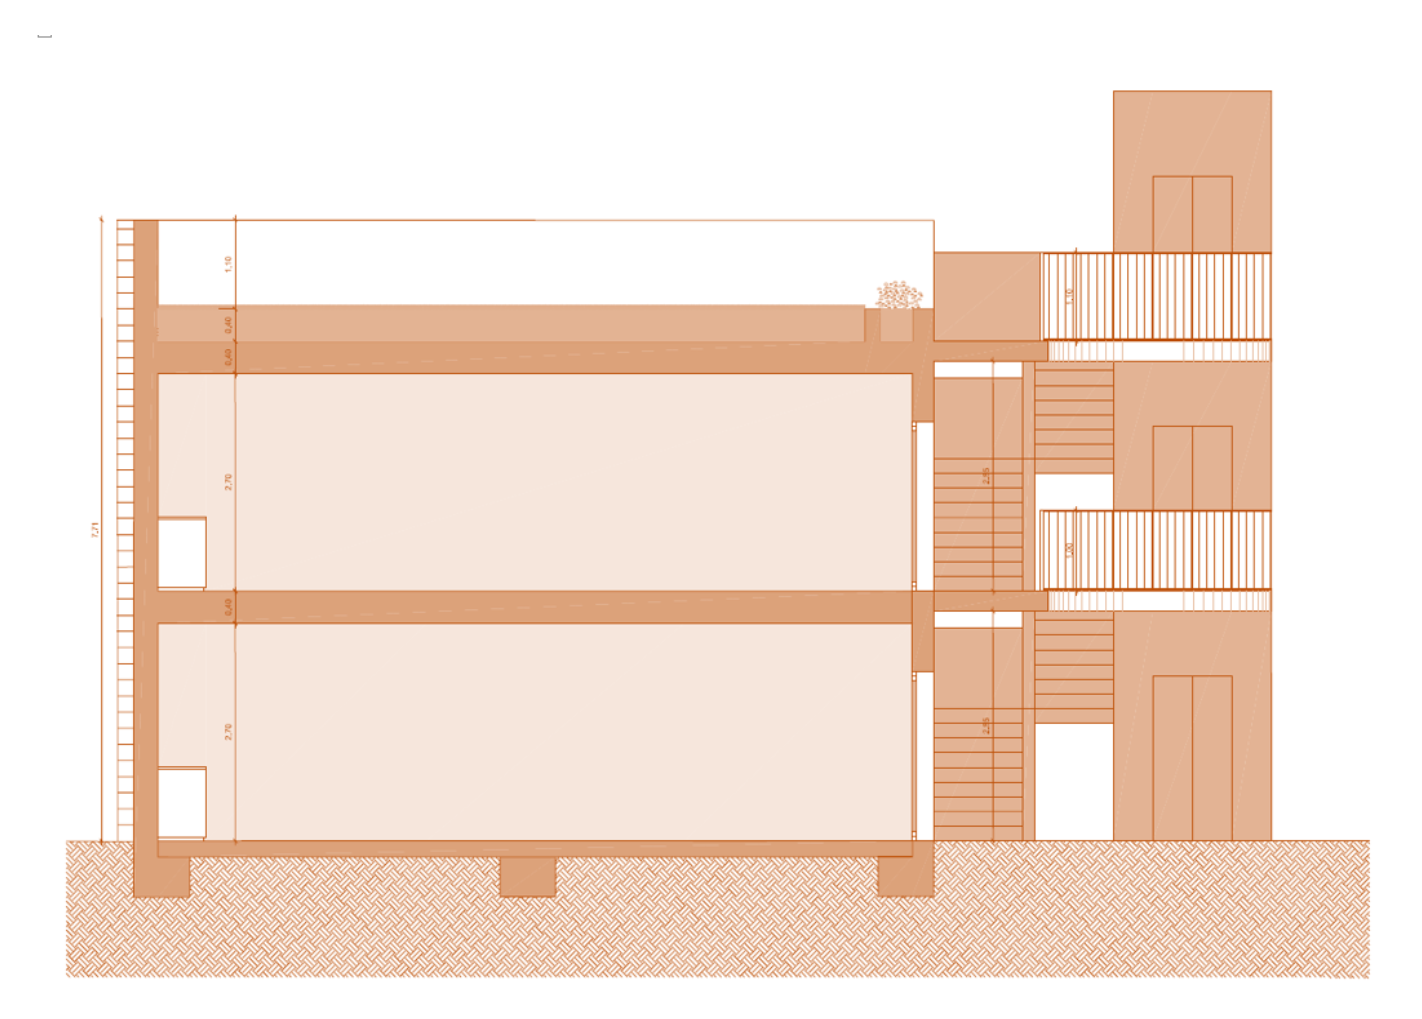 Architect´s plan of the secondary school building from the side